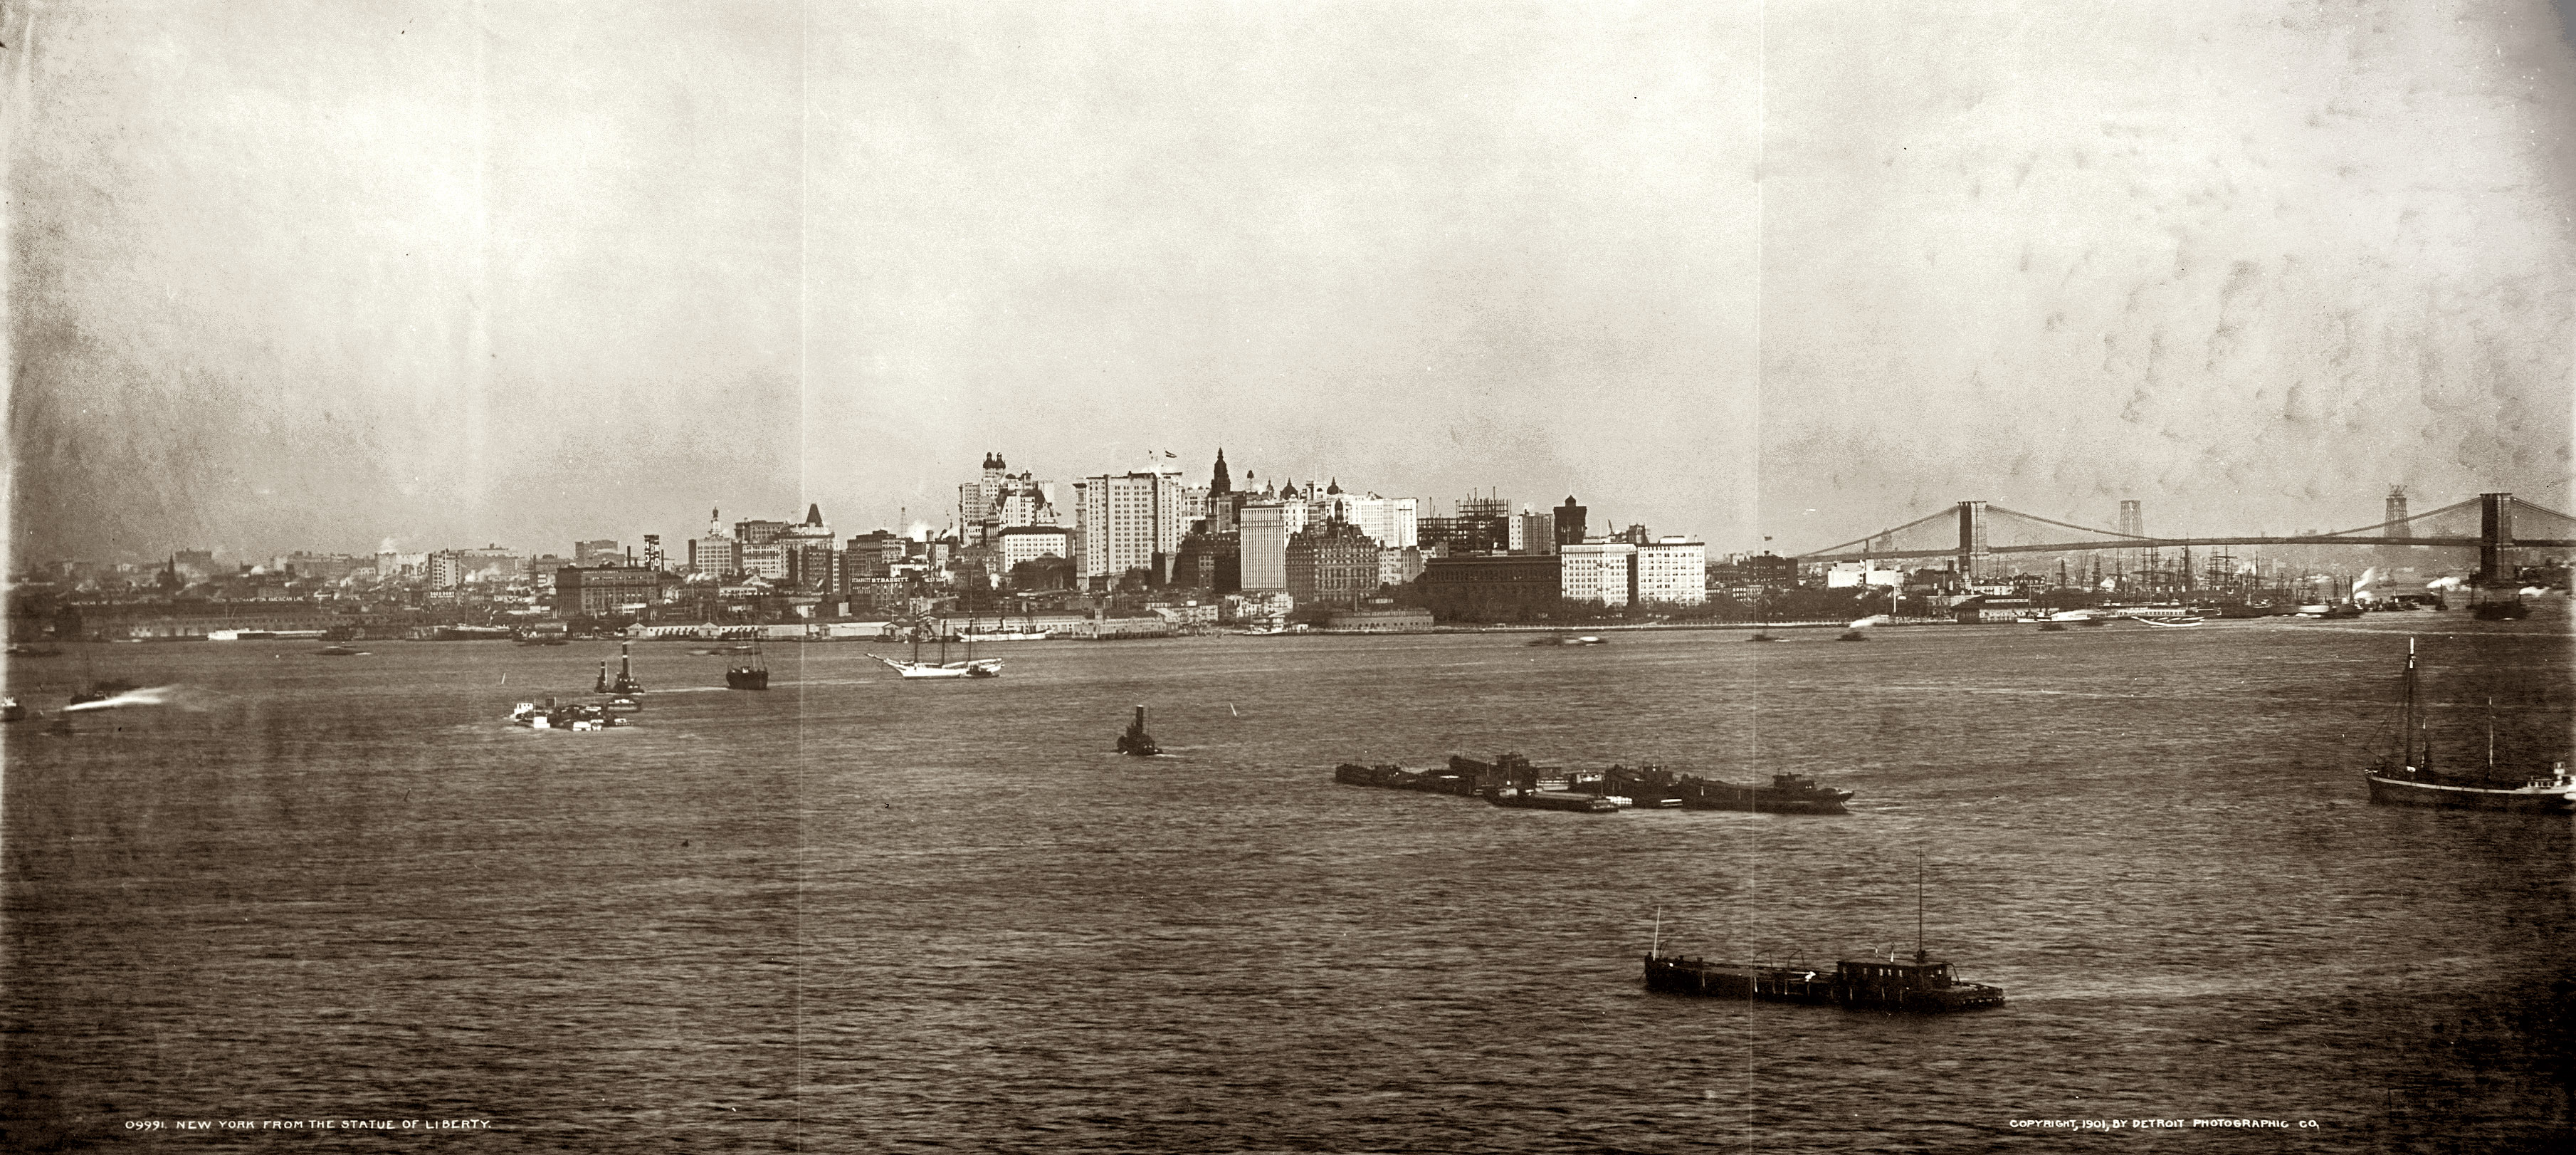 New York City as seen from the Statue of Liberty circa 1901. Cyanotype by the Detroit Photographic Co. View full size.